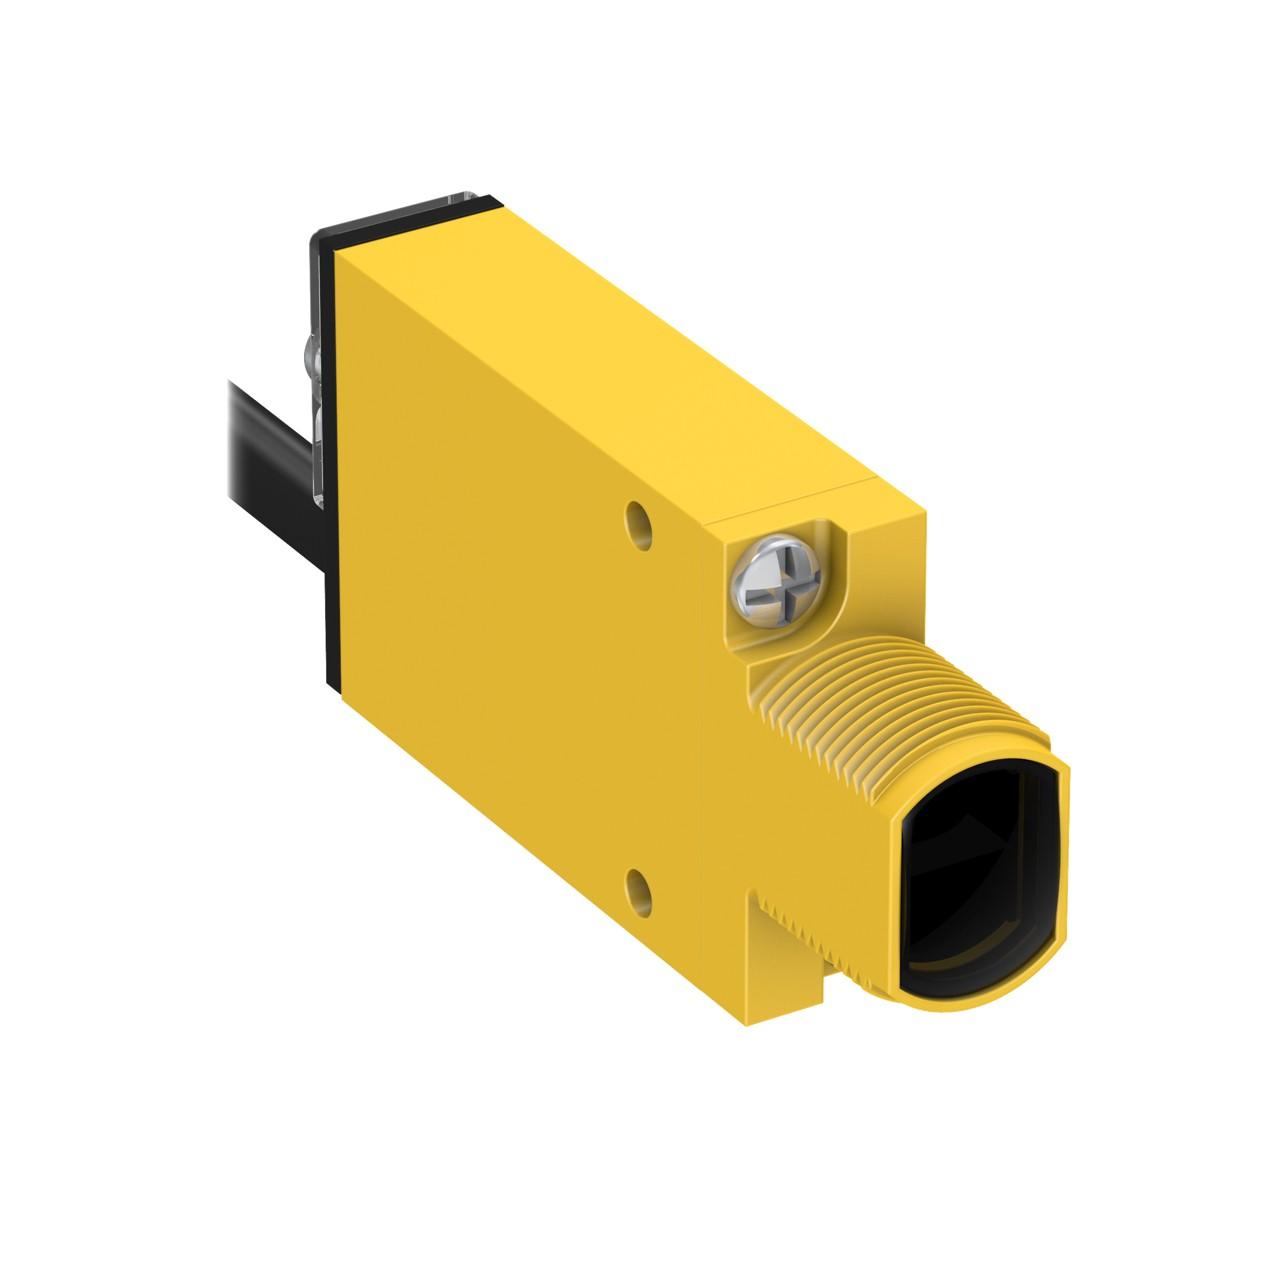 Banner SM2A31RQD Photo-electric sensor receiver with through-beam system / opposed mode - Banner Engineering (MINI-BEAM series - SM2A312) - Part #26846 - Sensing range 300mm - Infrared (IR) light (880nm) - 1 x digital output (Solid-state AC output; SPST contact type) (Lig